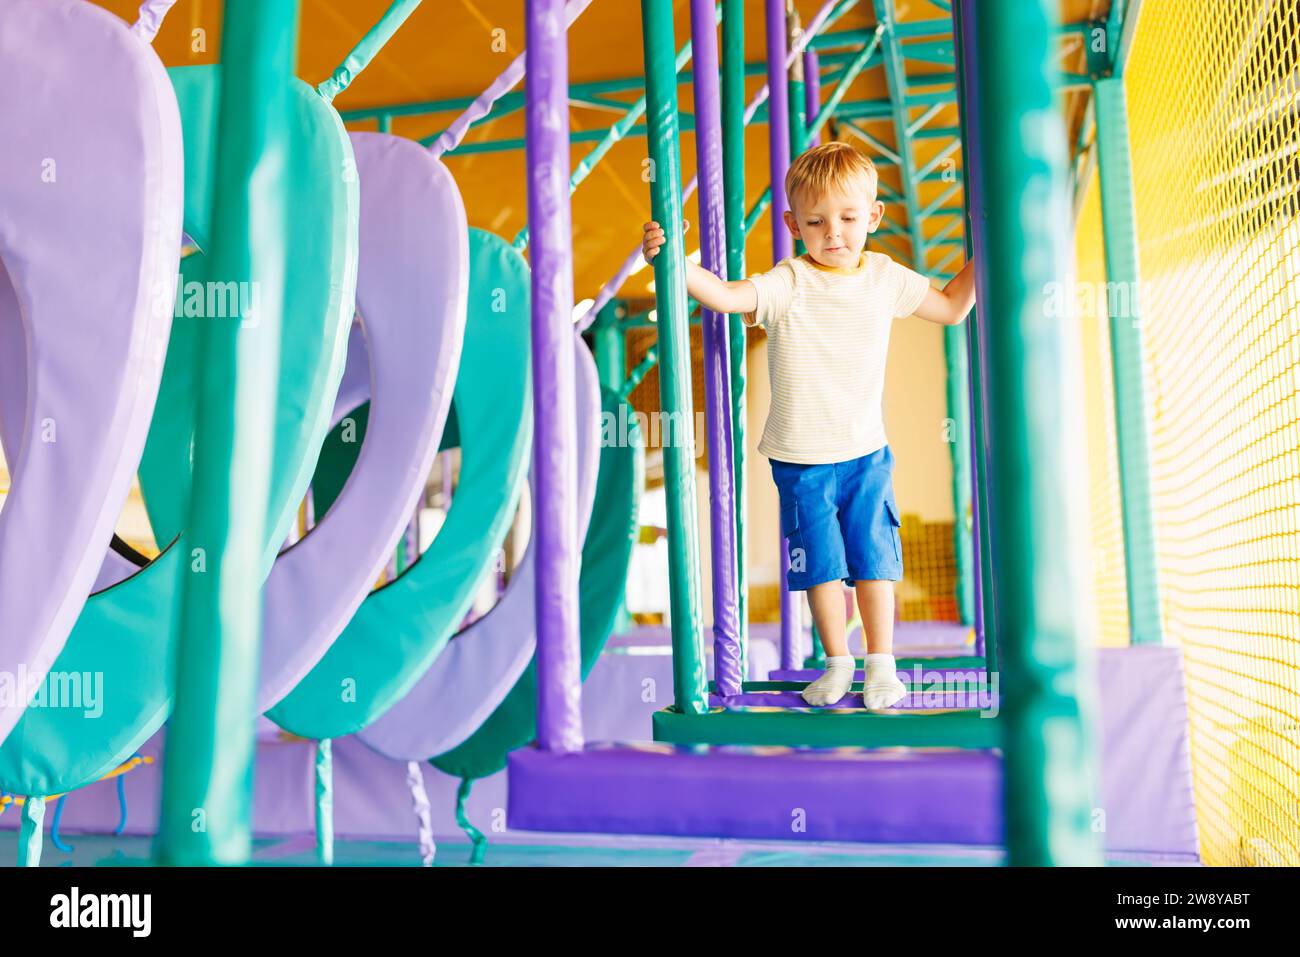 Cute little boy crawling and playing on colorful playground at amusement park Stock Photo